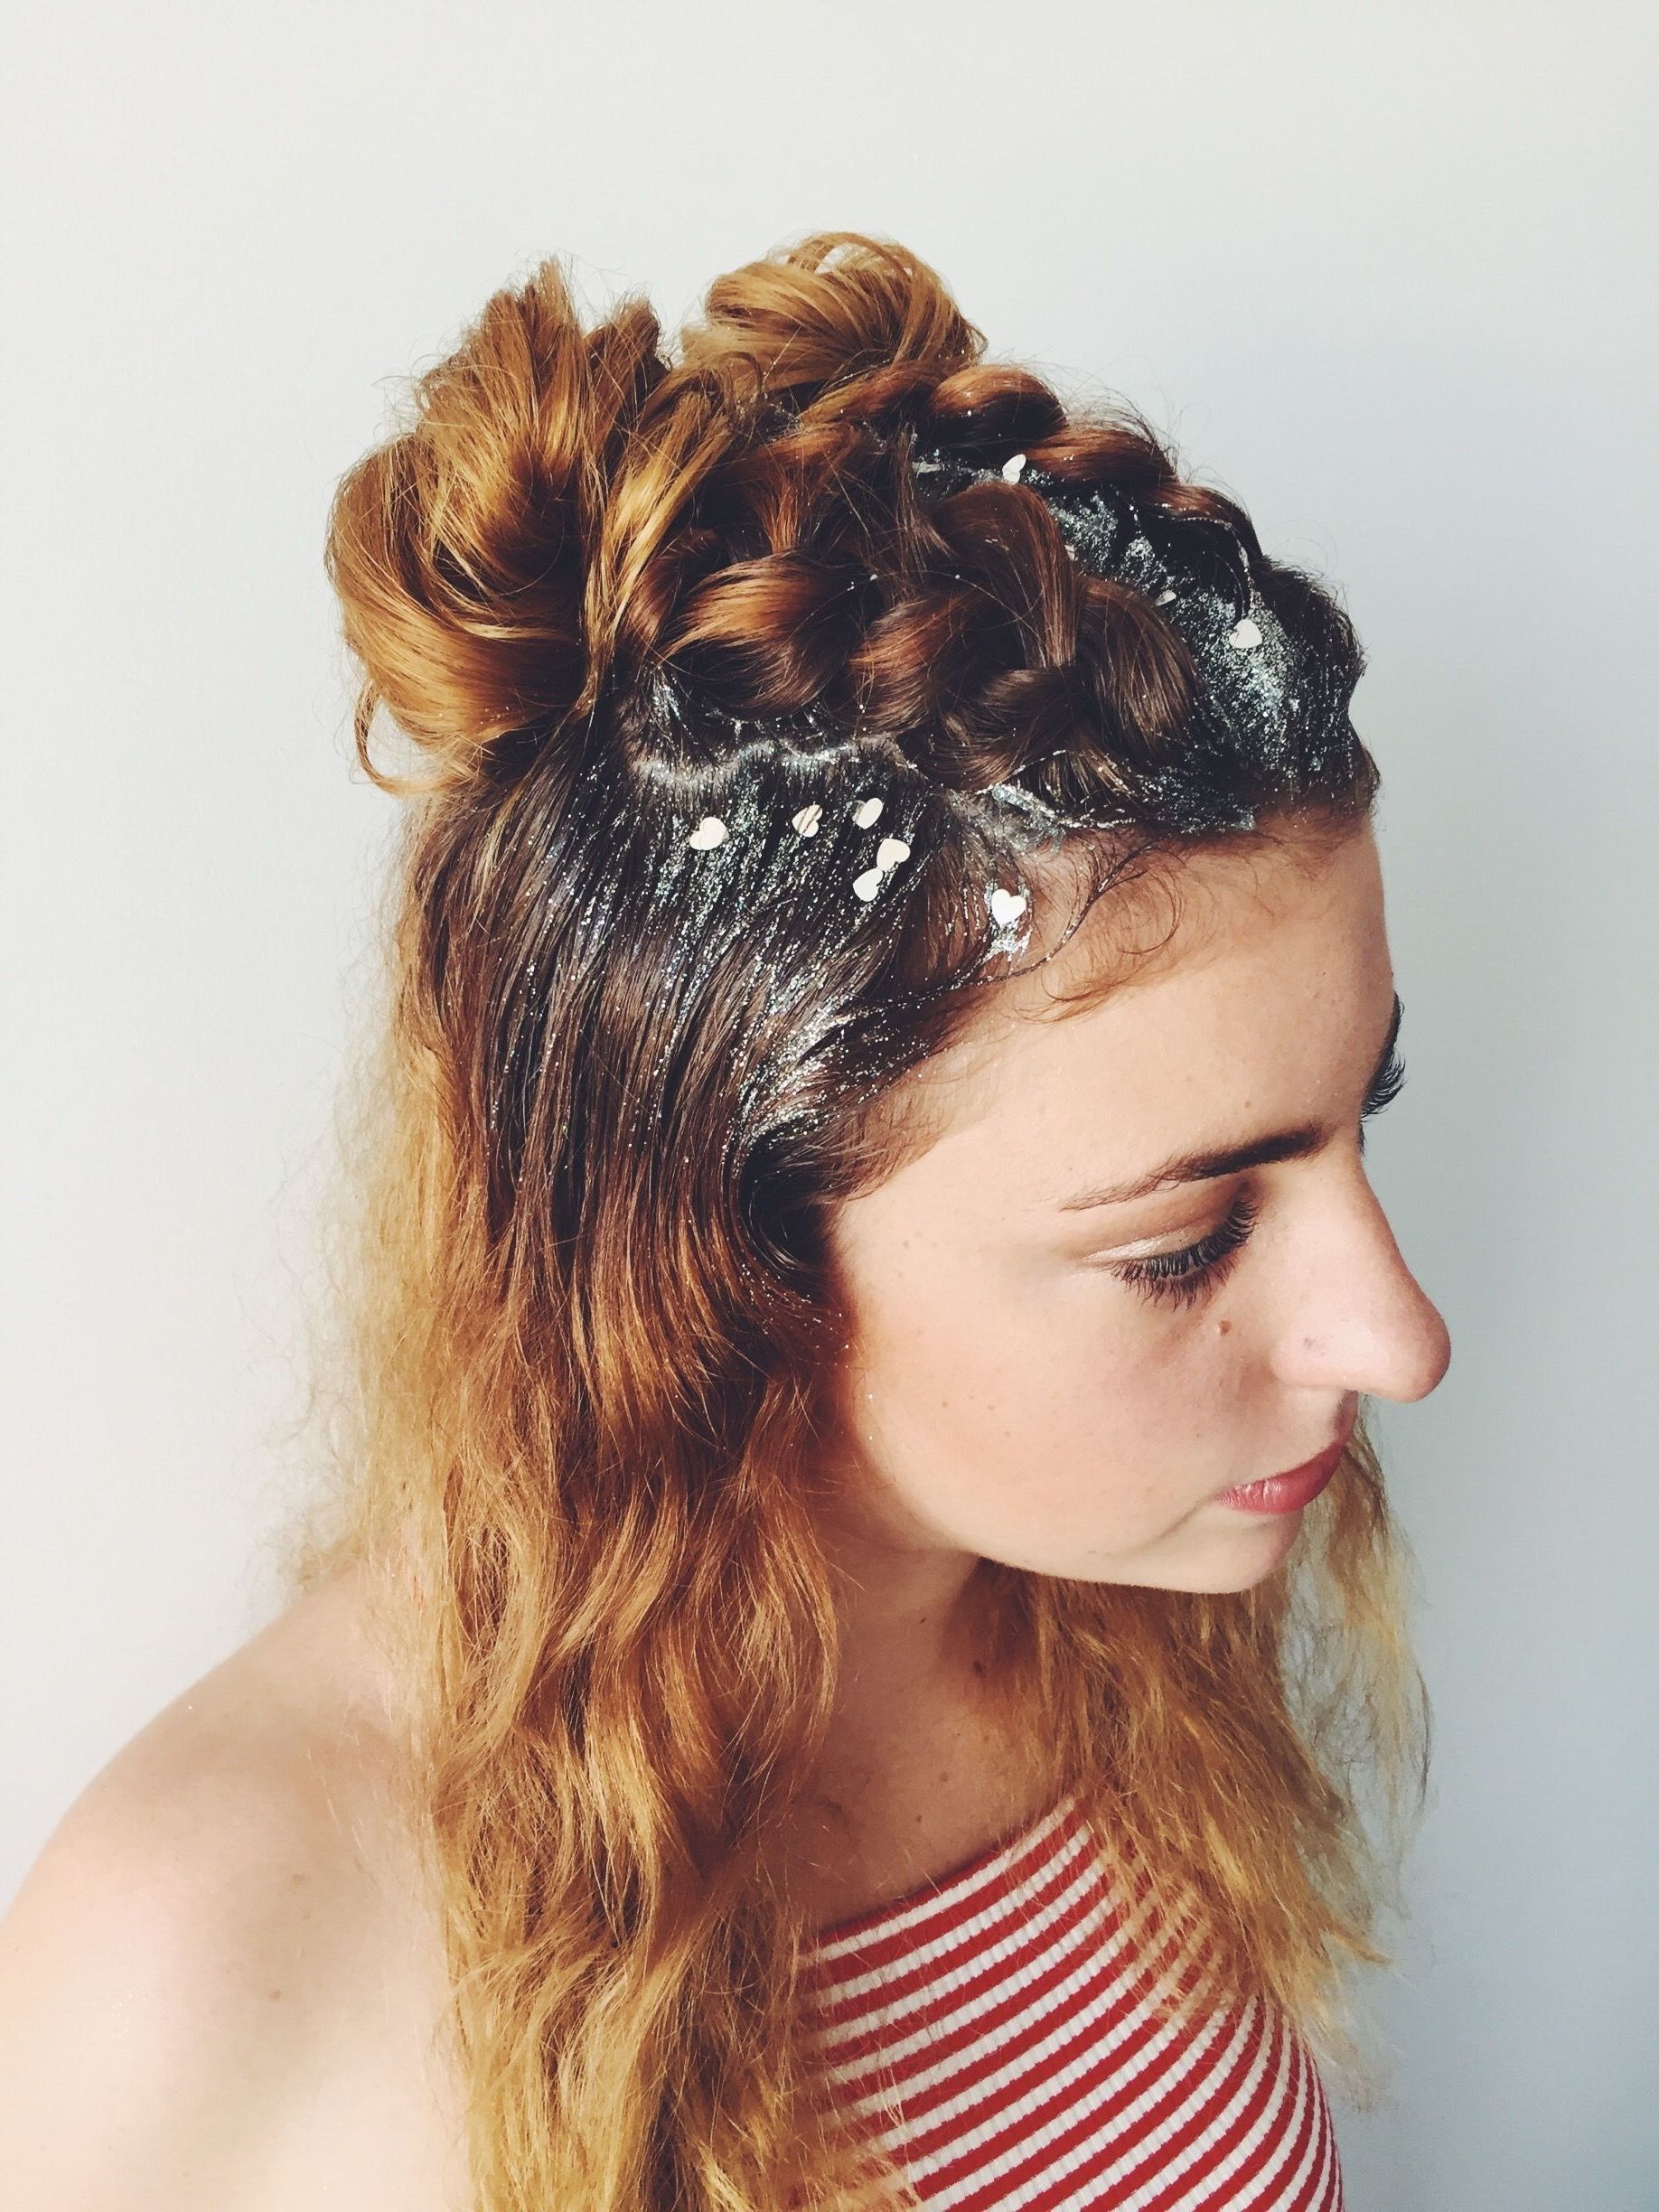 Glitter Roots With Regard To Widely Used Glitter Ponytail Hairstyles For Concerts And Parties (View 11 of 20)